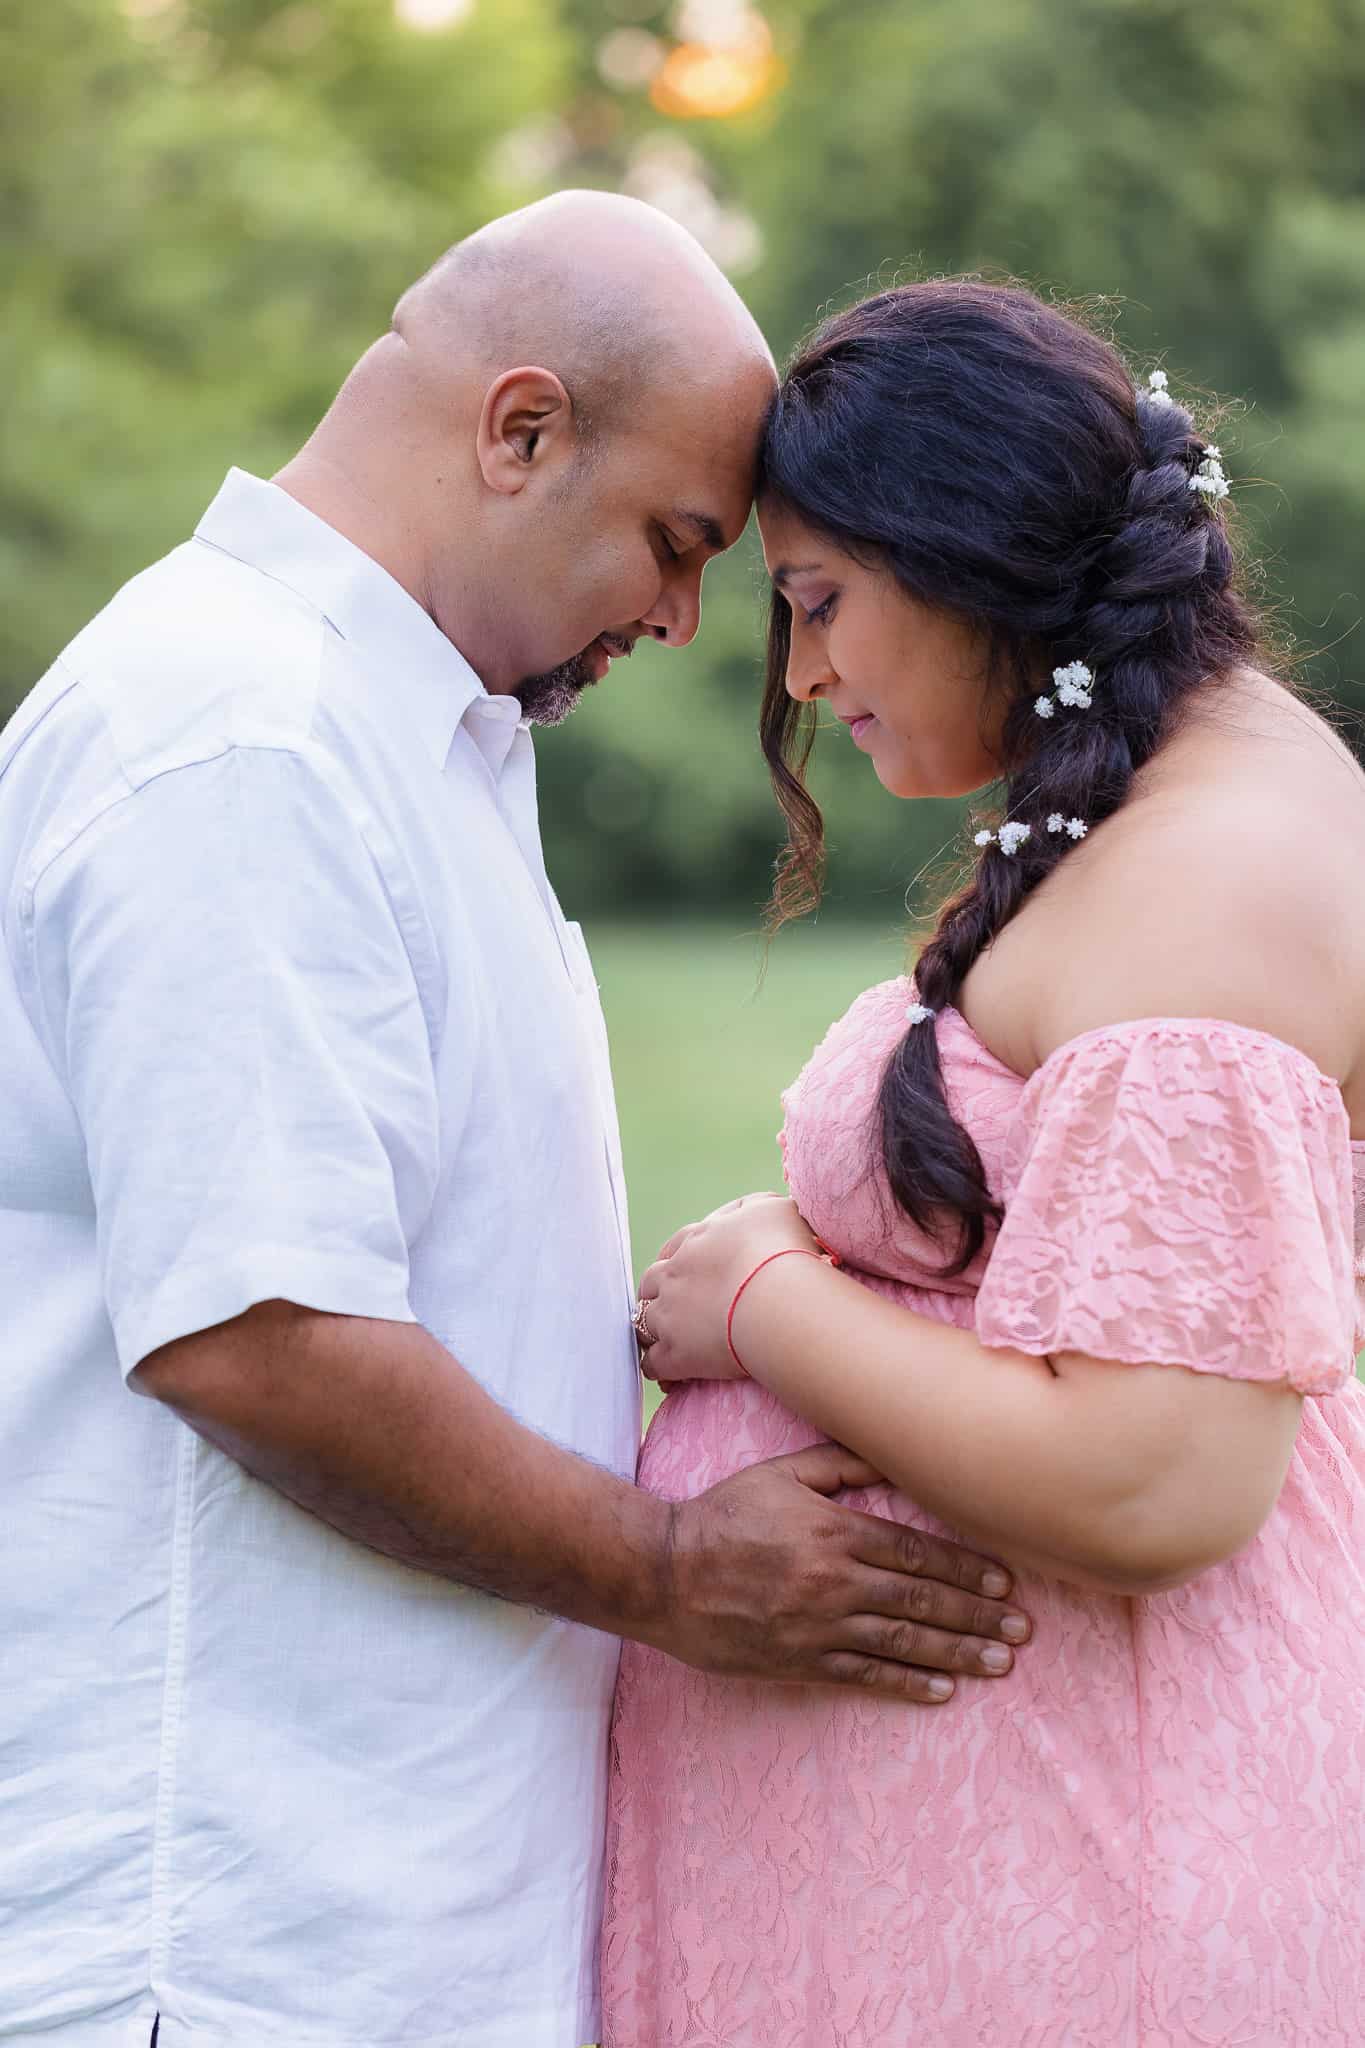 An expecting mom and dad touching foreheads and embracing the pregnant belly in a park at sunset.